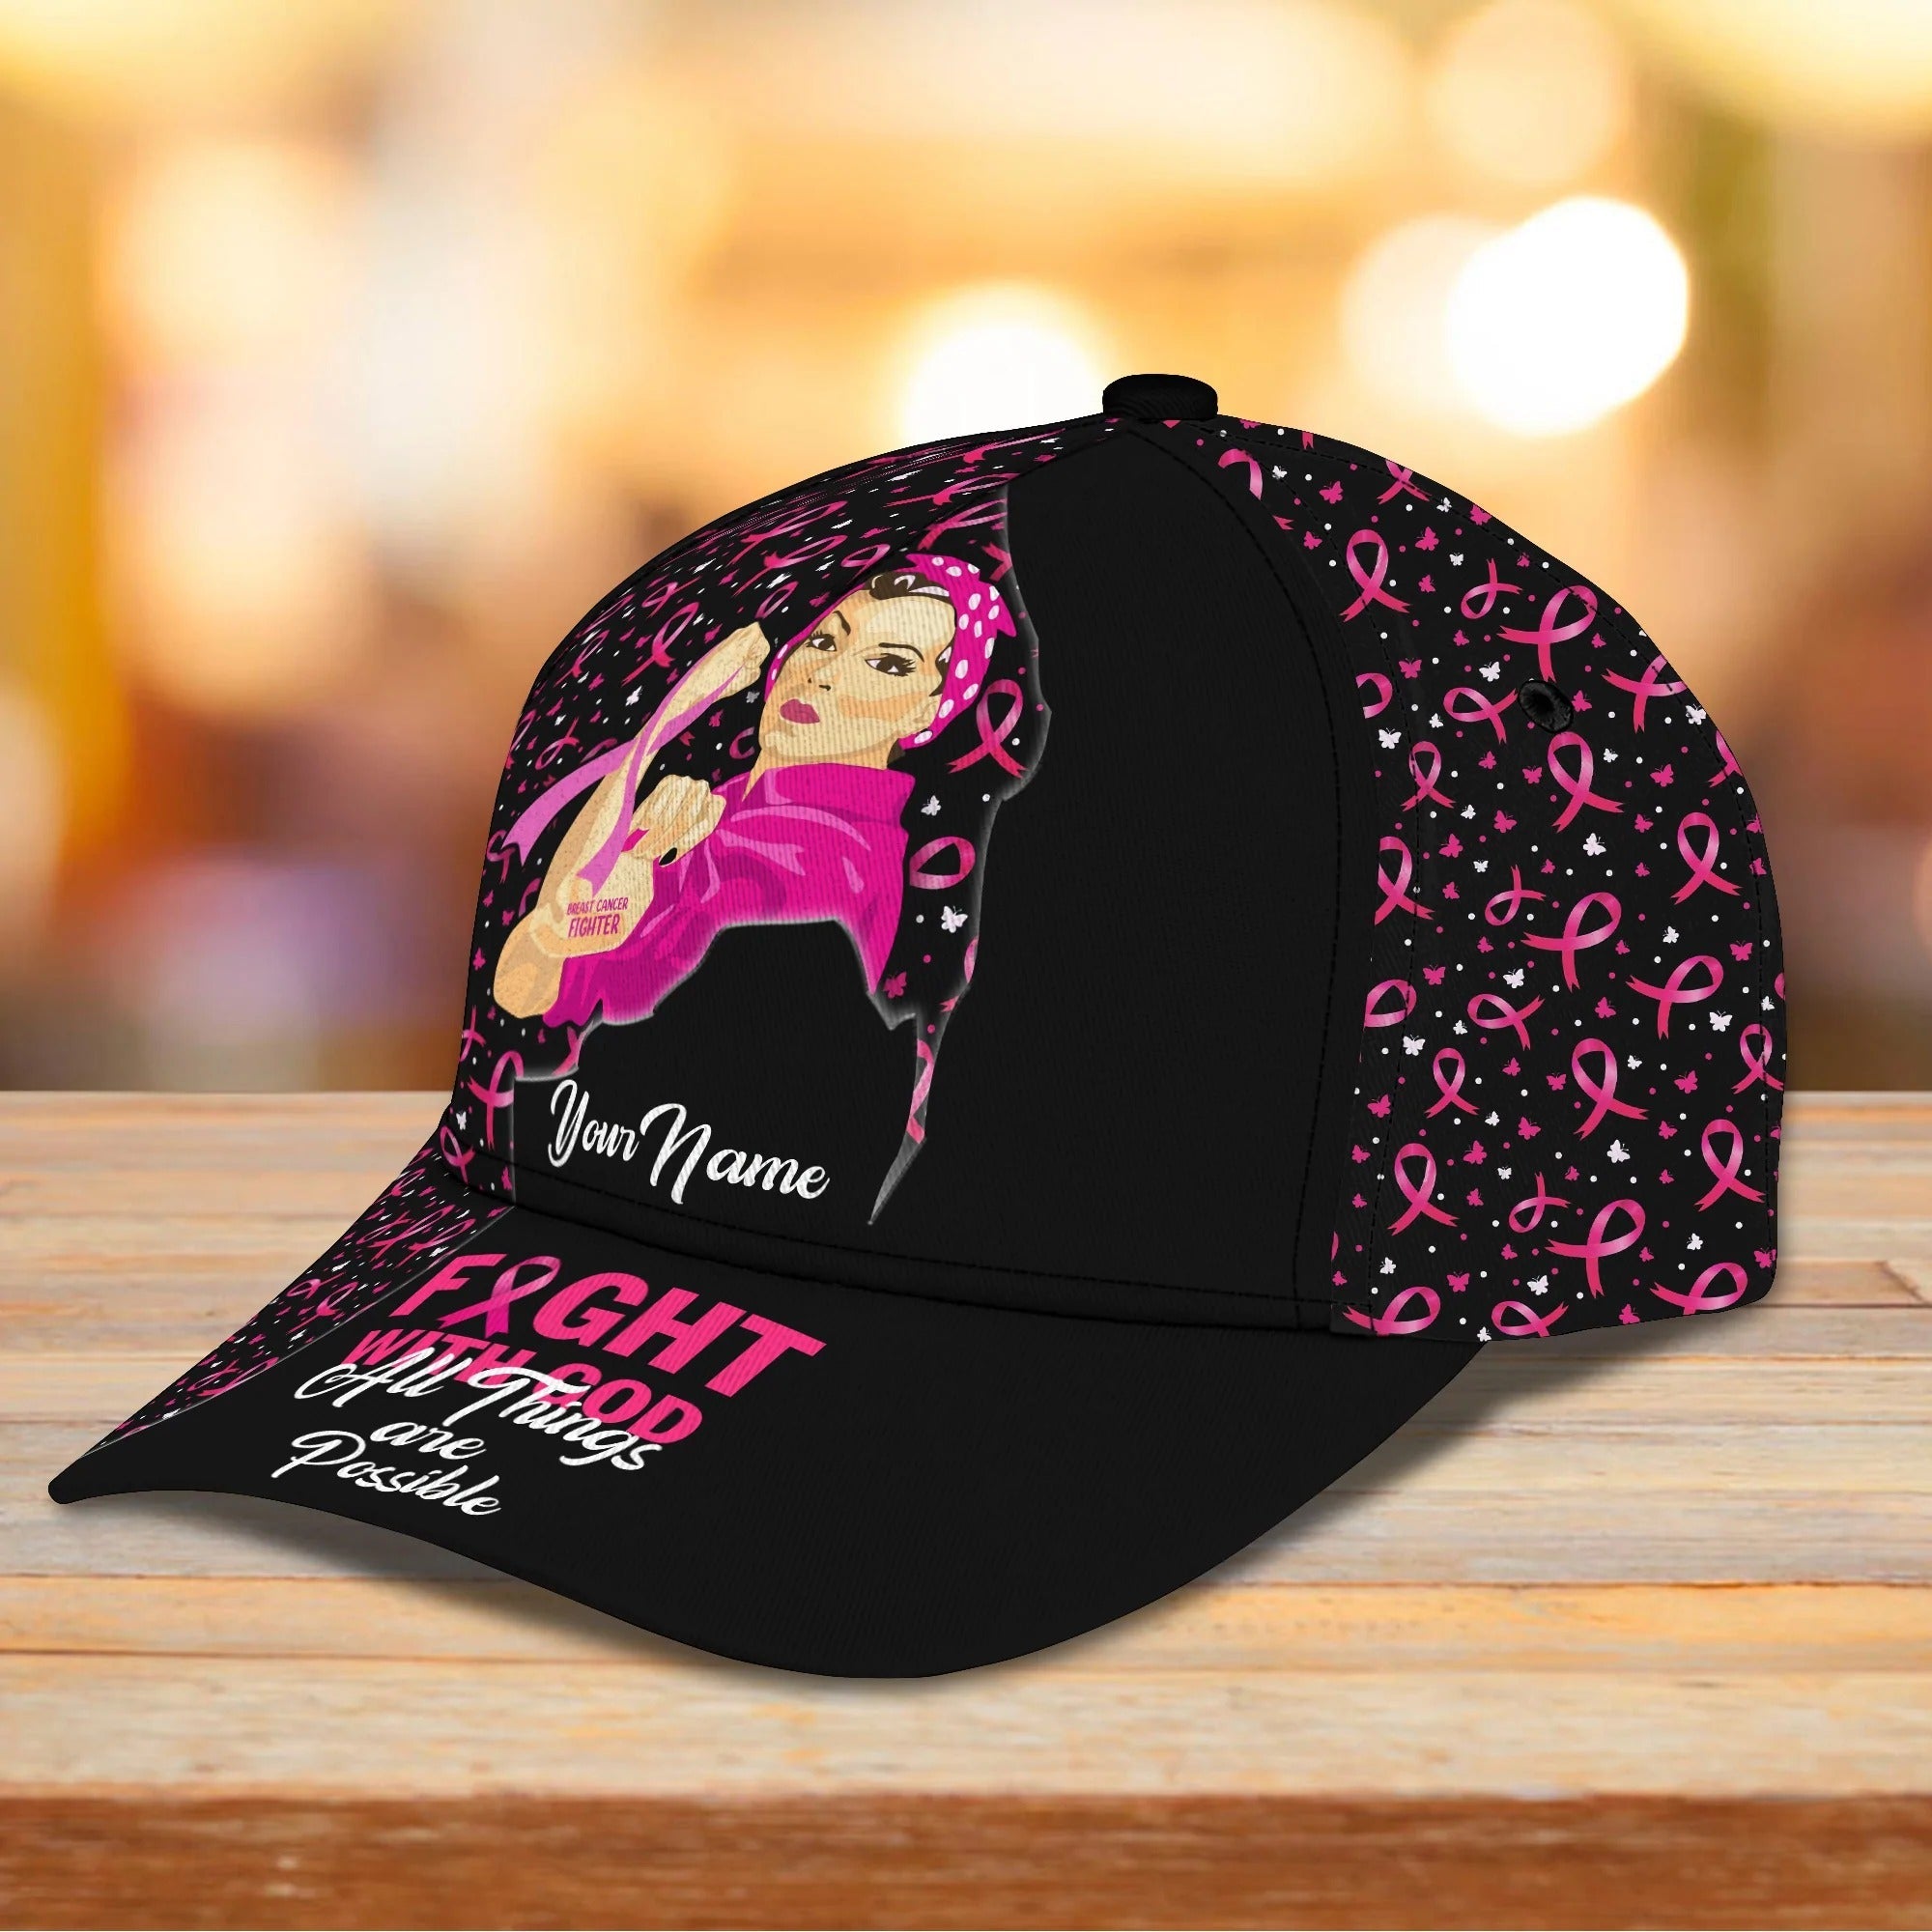 Custom Breast Cancer Awareness Cap Hat/ All Things are Possible/ Gift For Breast Cancer Survivor